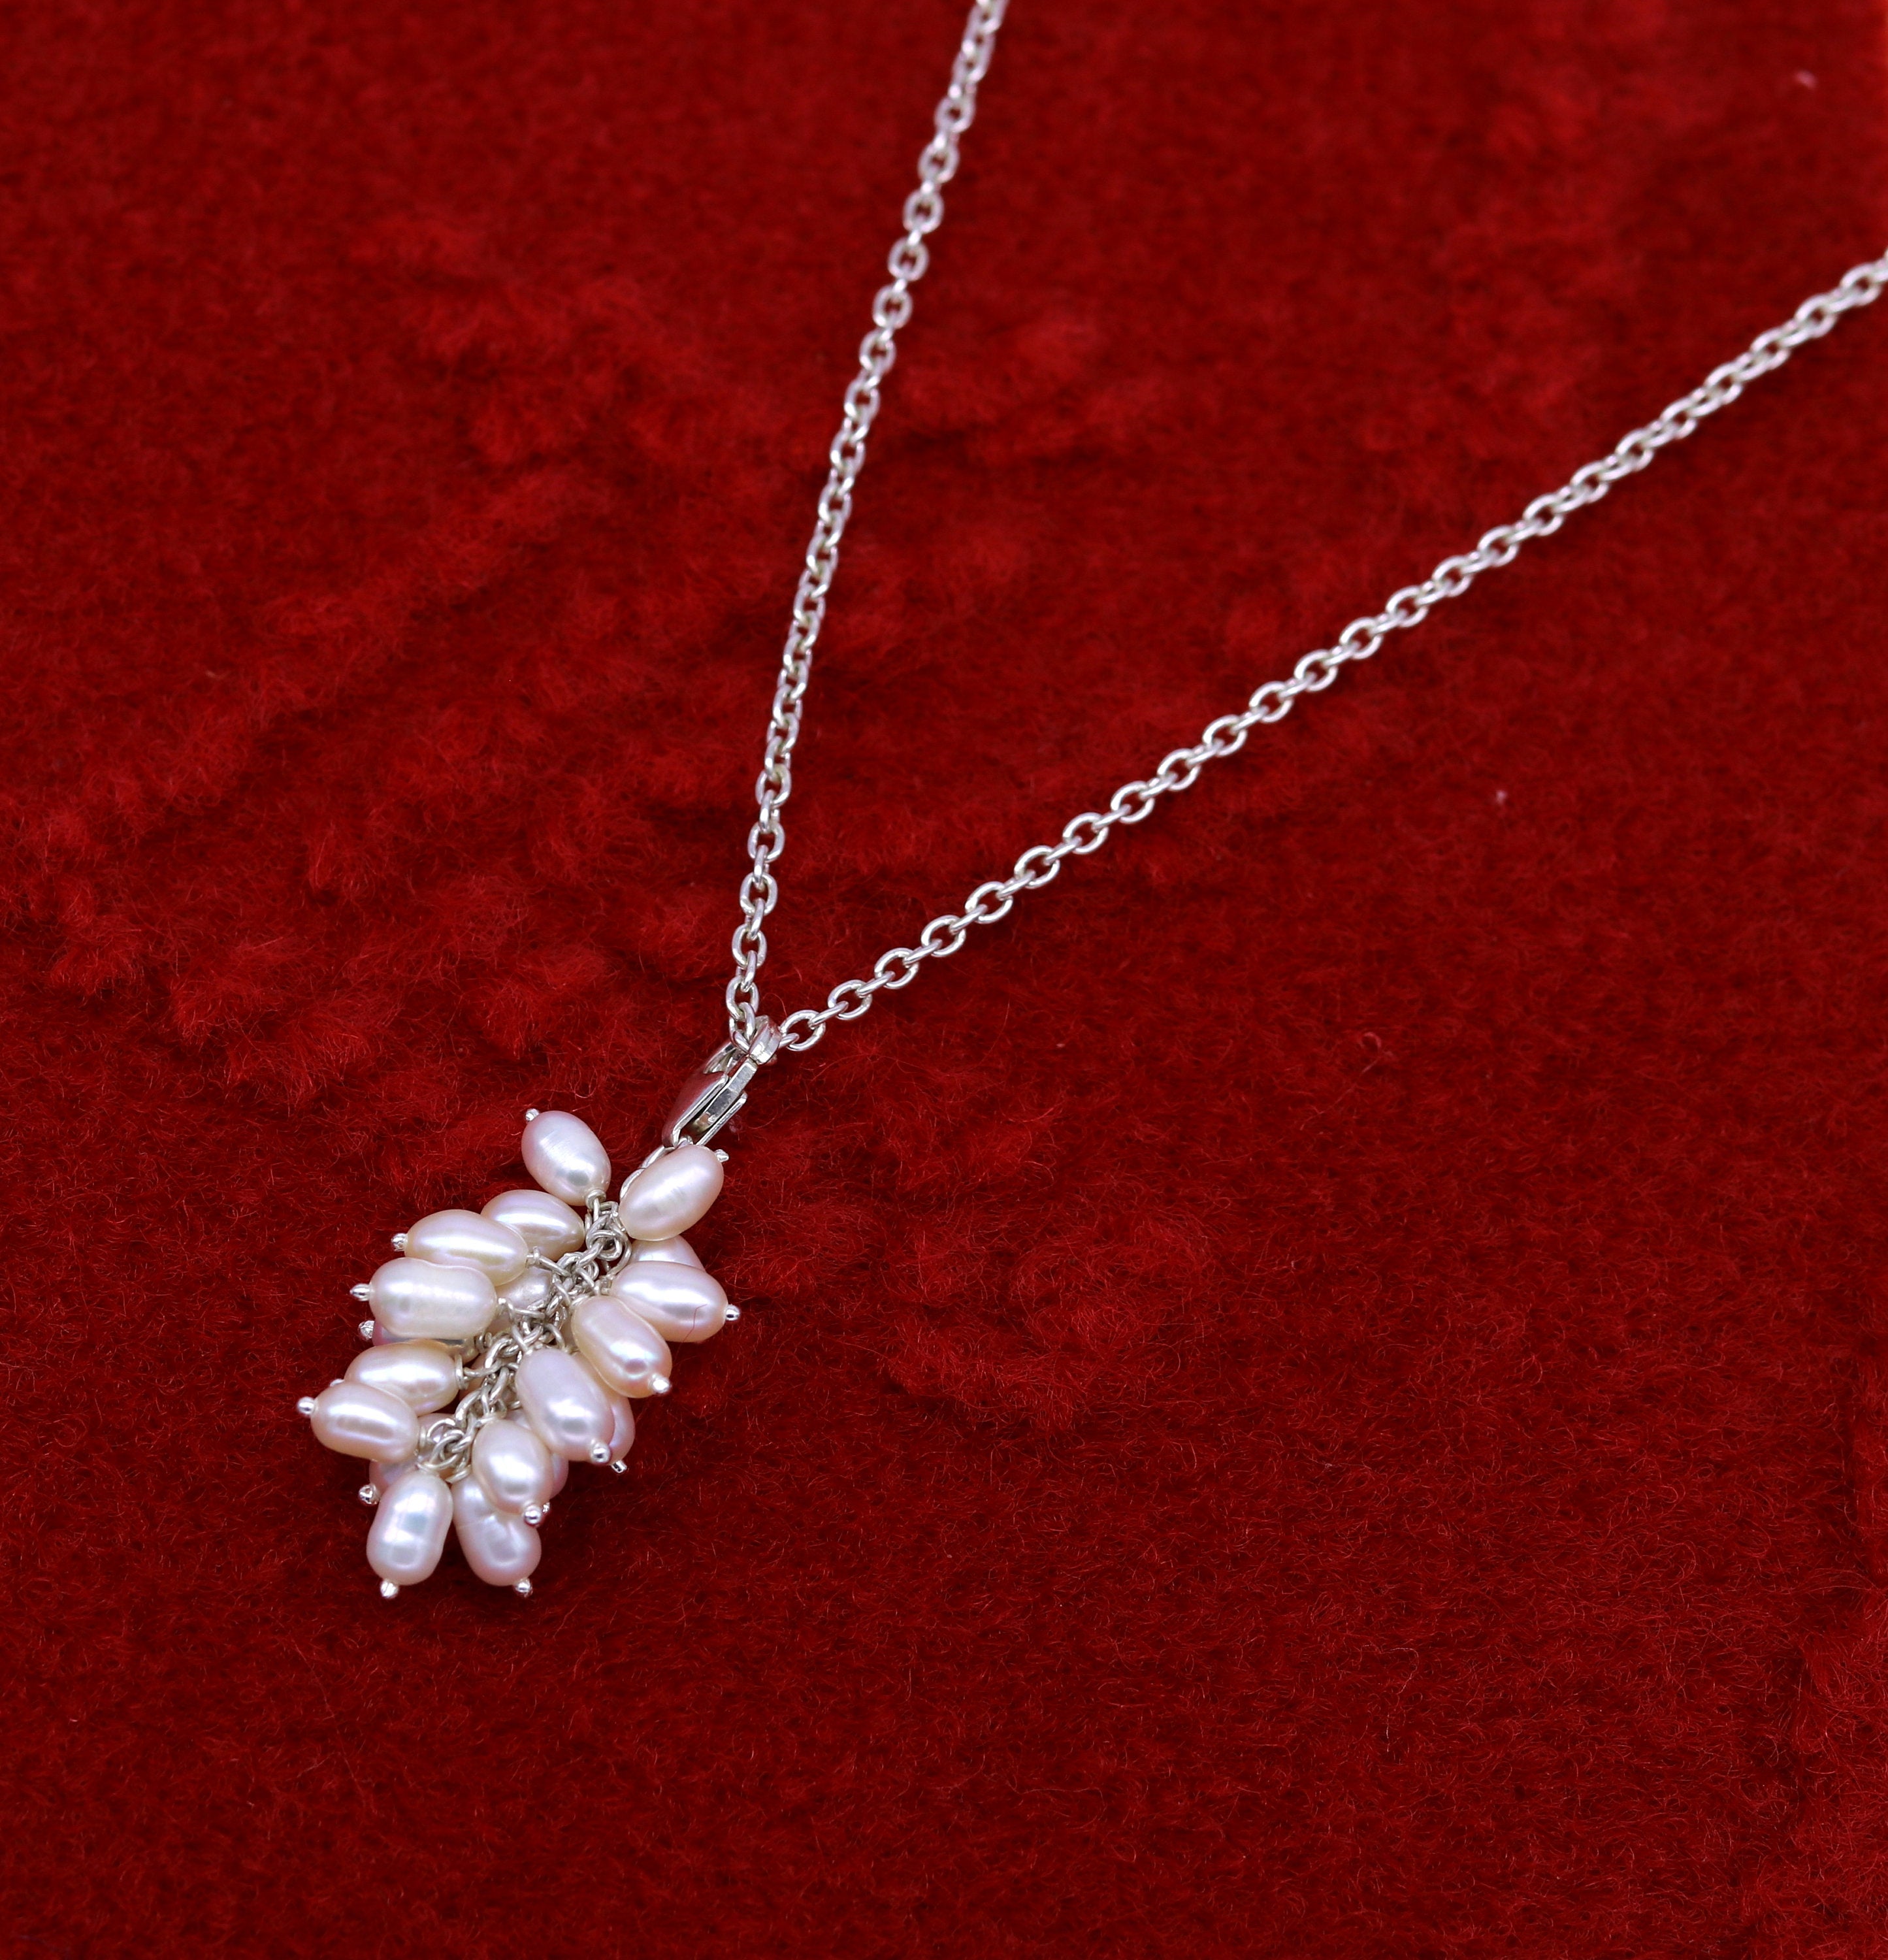 Sterling Silver Cherry Blossom Necklace - J.H. Breakell and Co.